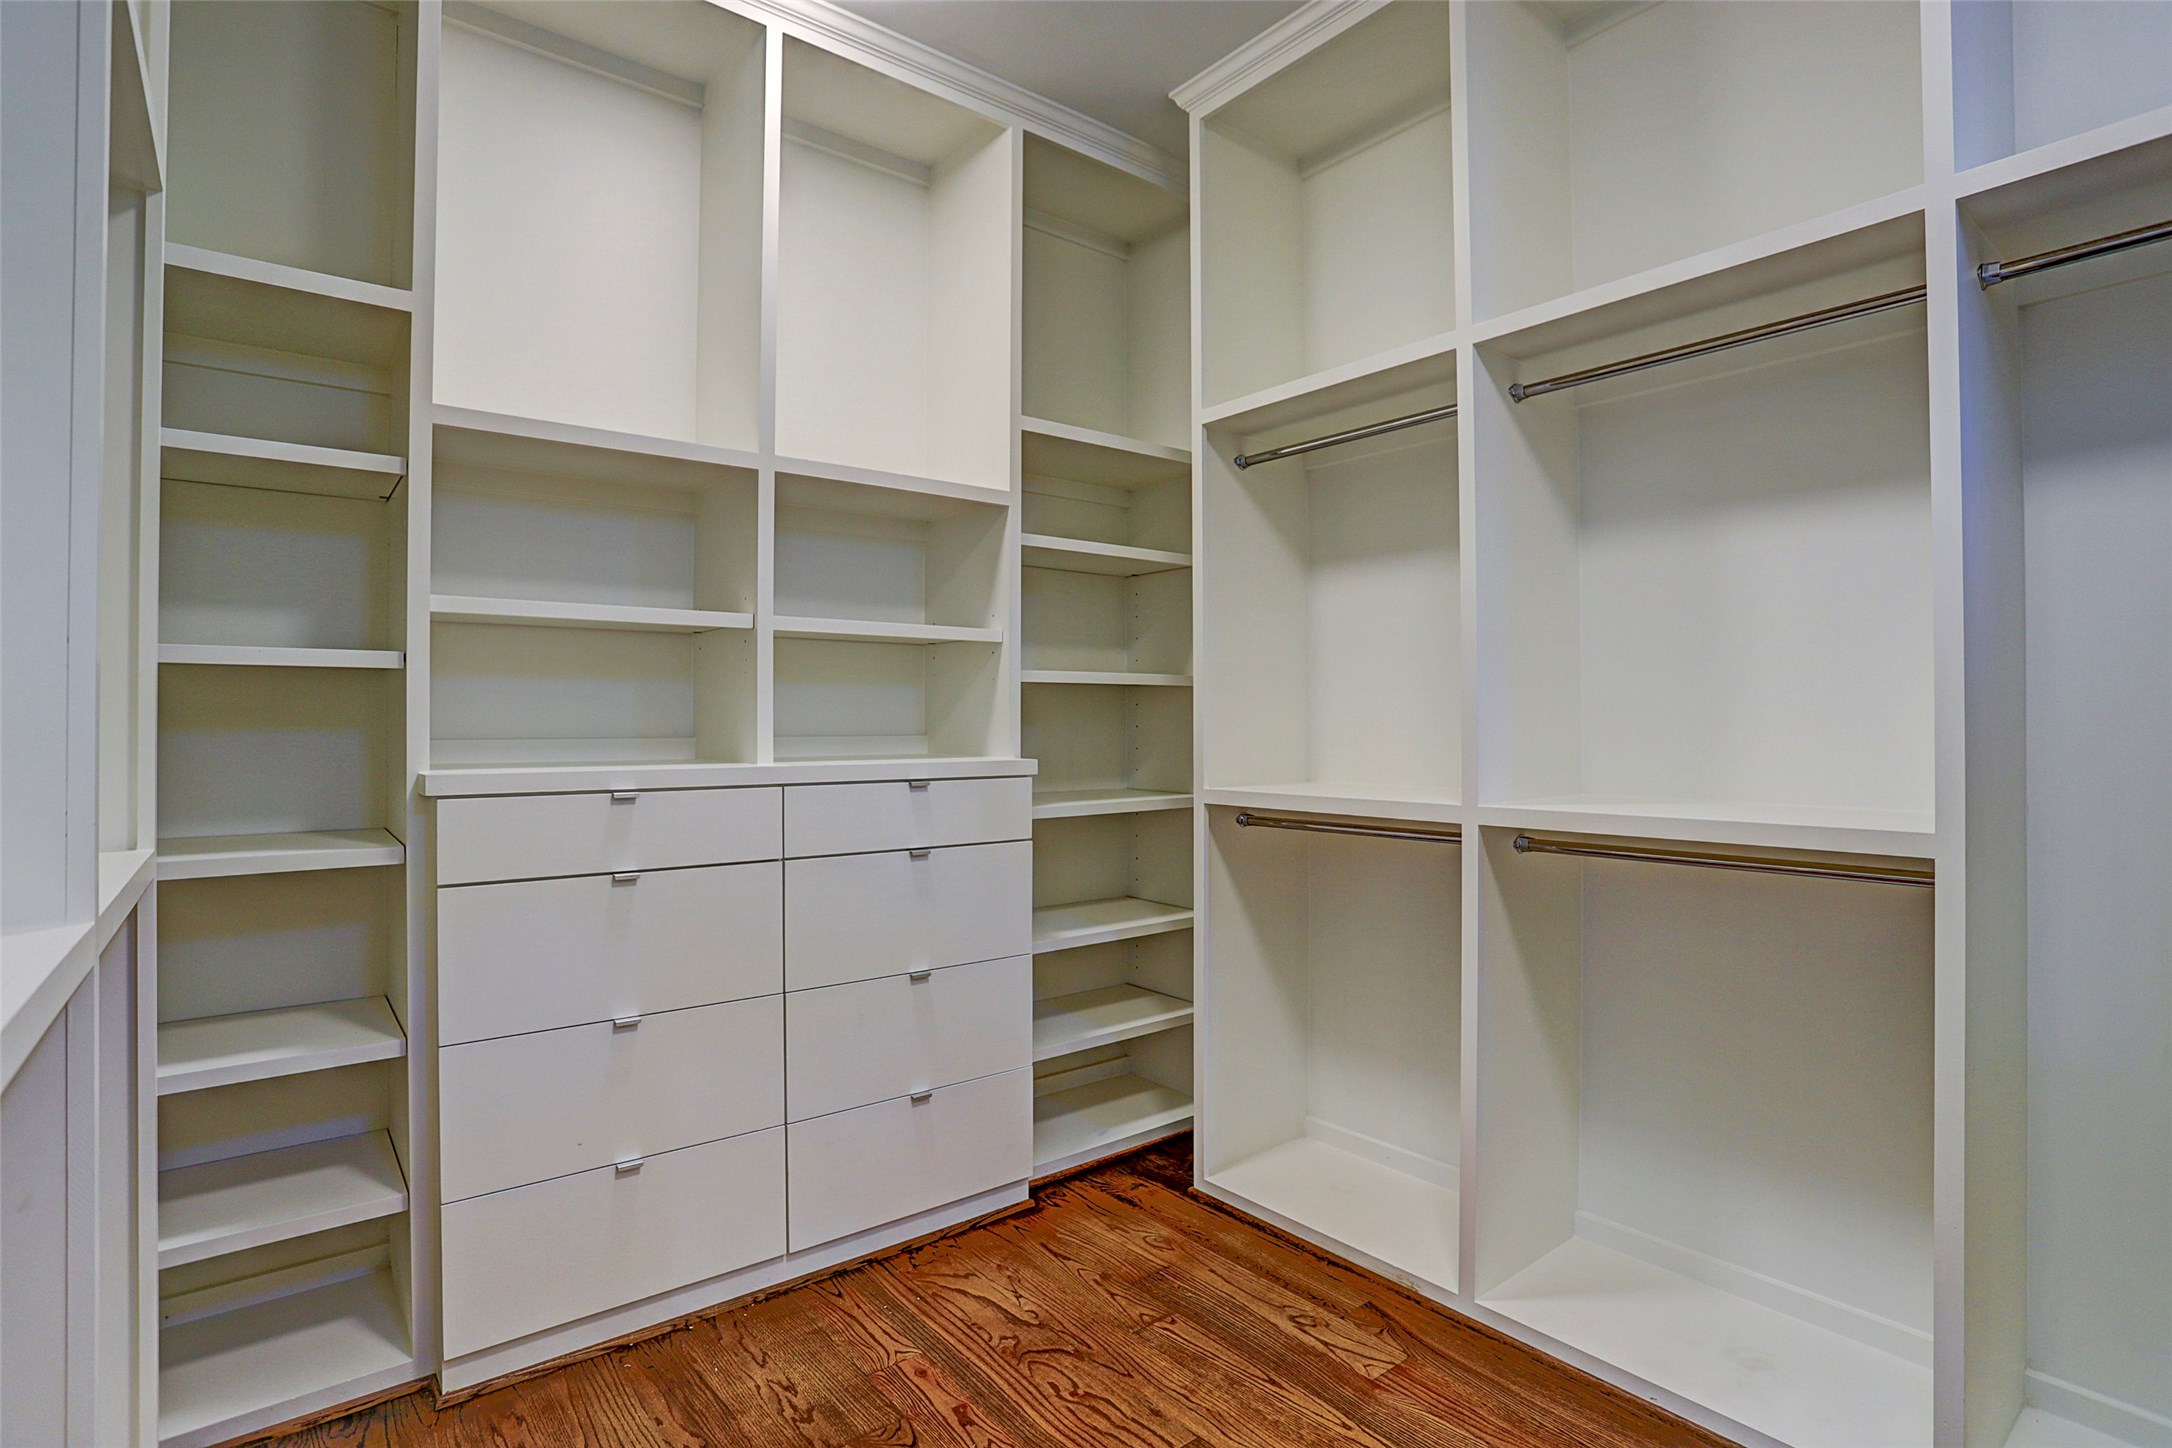 Master closet with built-in drawers, show racks & pull-down racks for closet